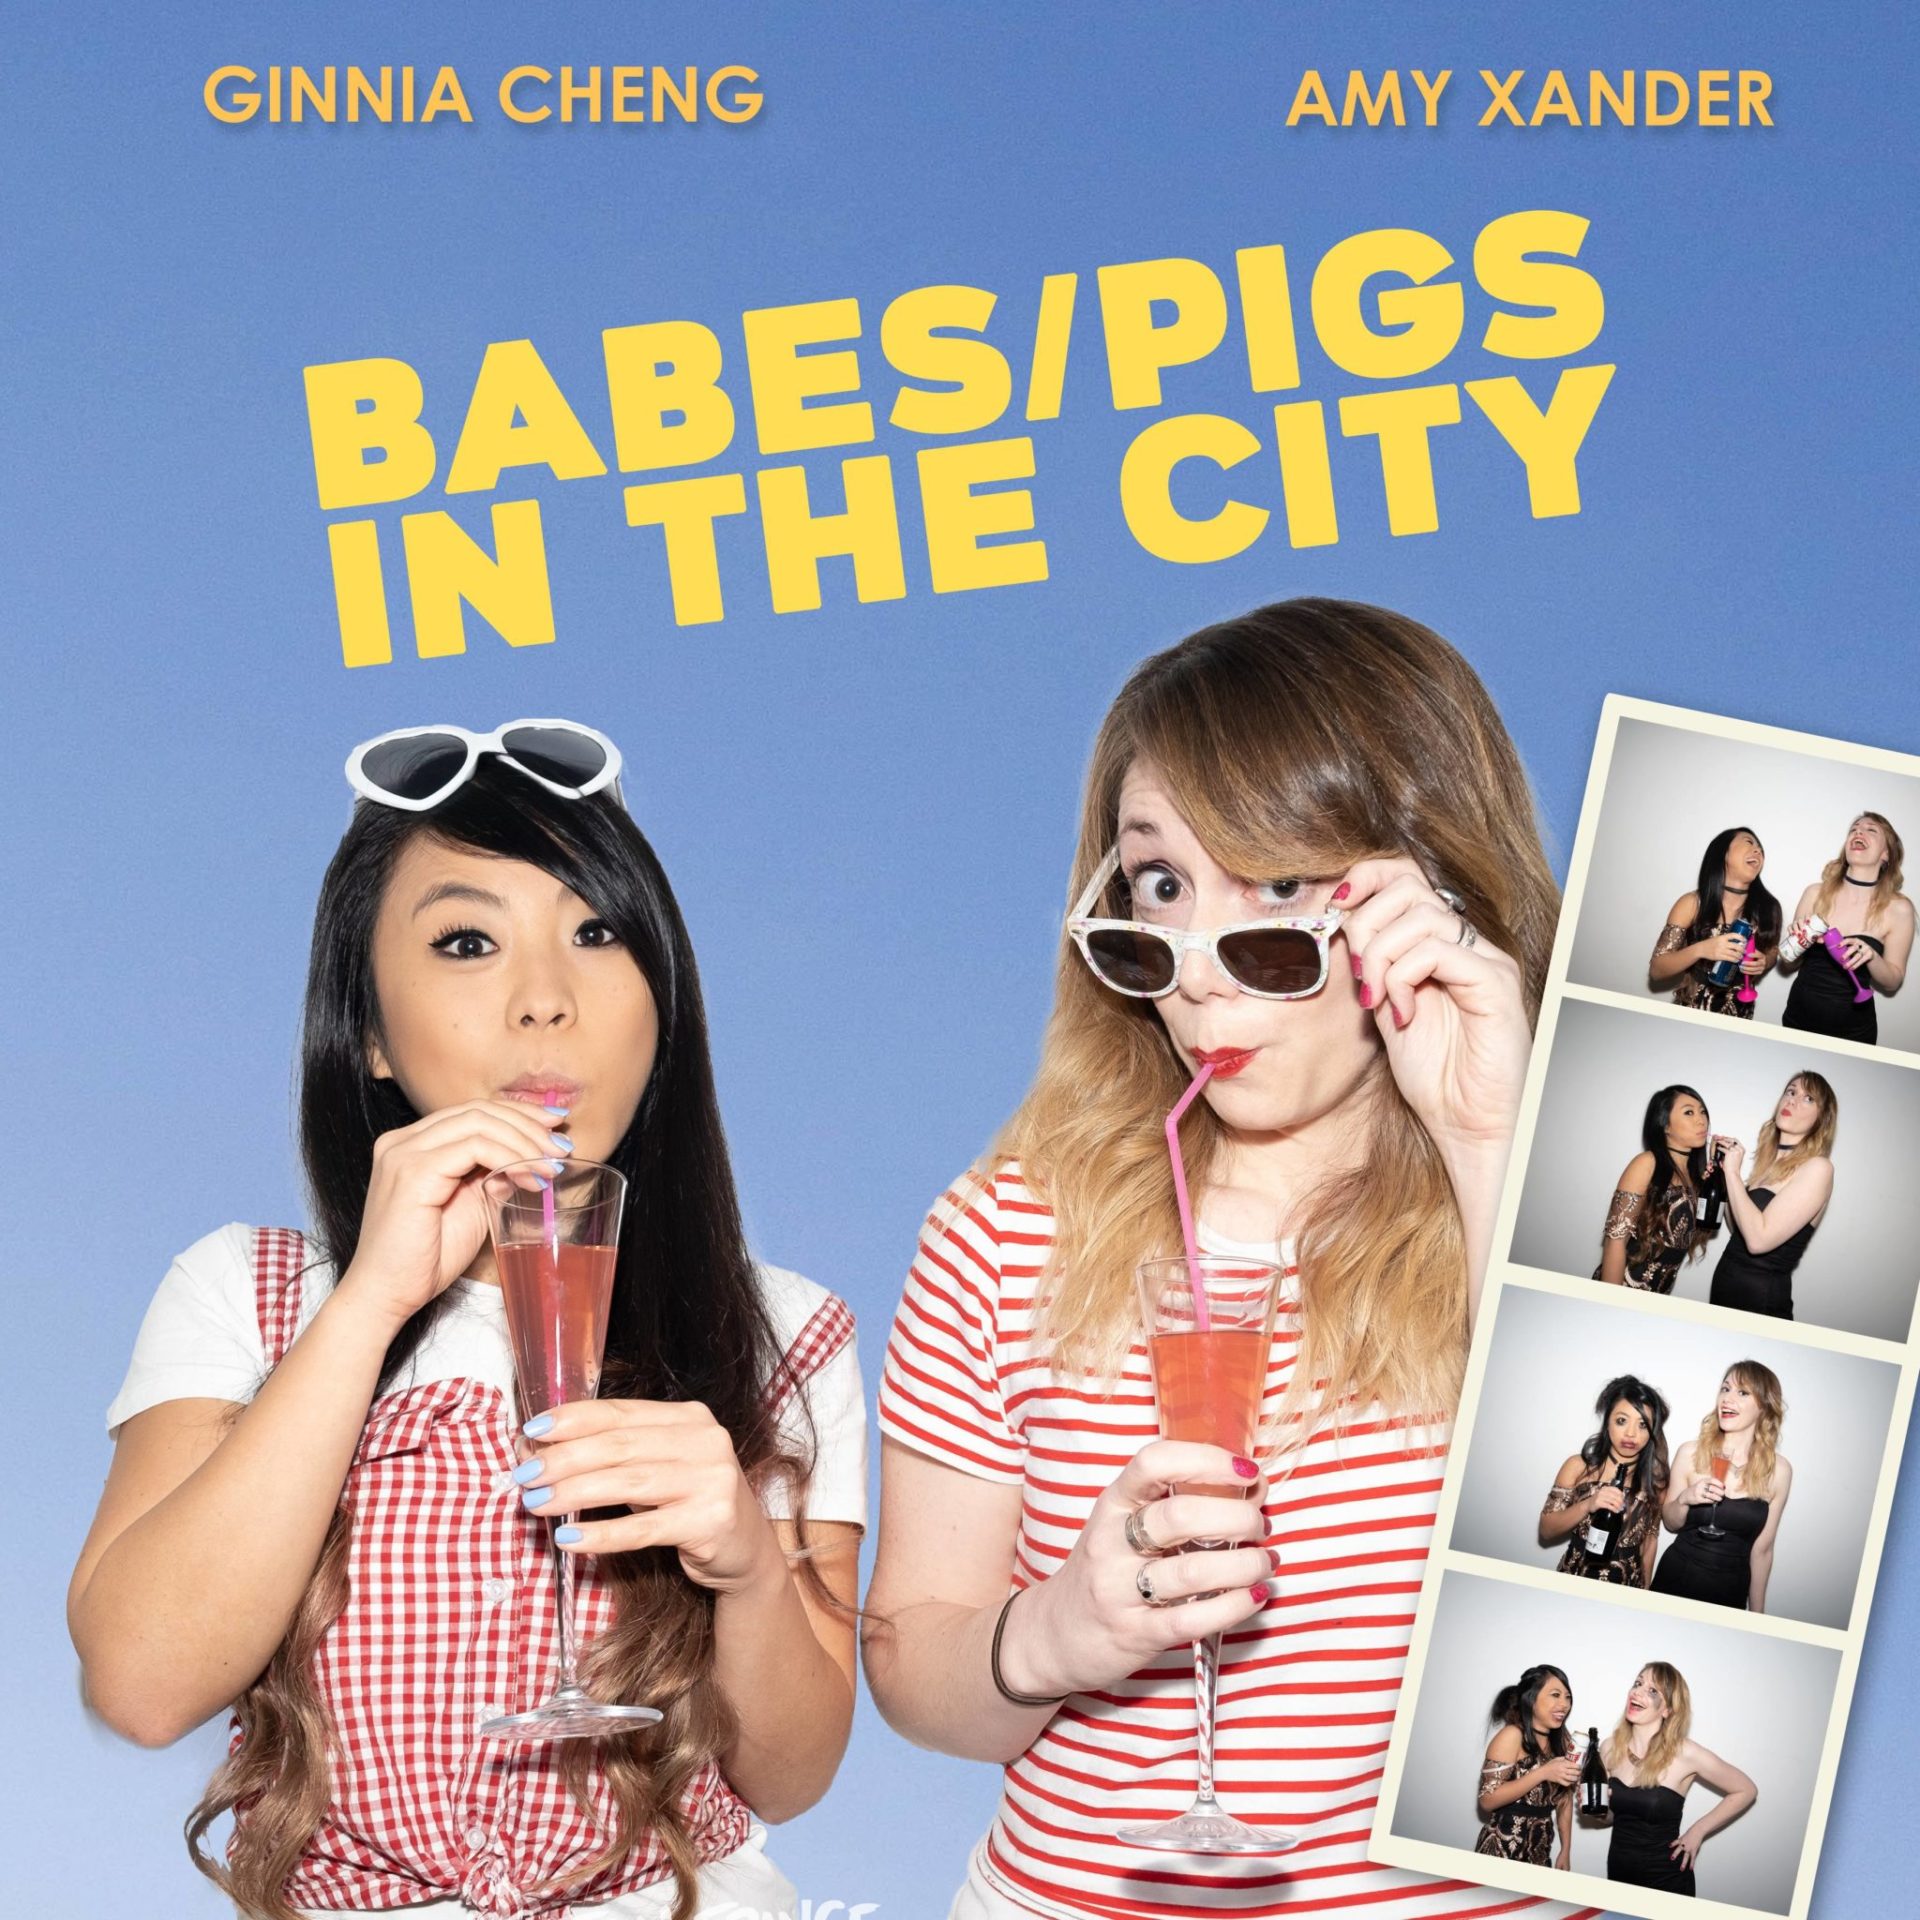 Ginnia Cheng & Amy Xander: 'Babes/Pigs in the City' Brighton Fringe Festival 2019